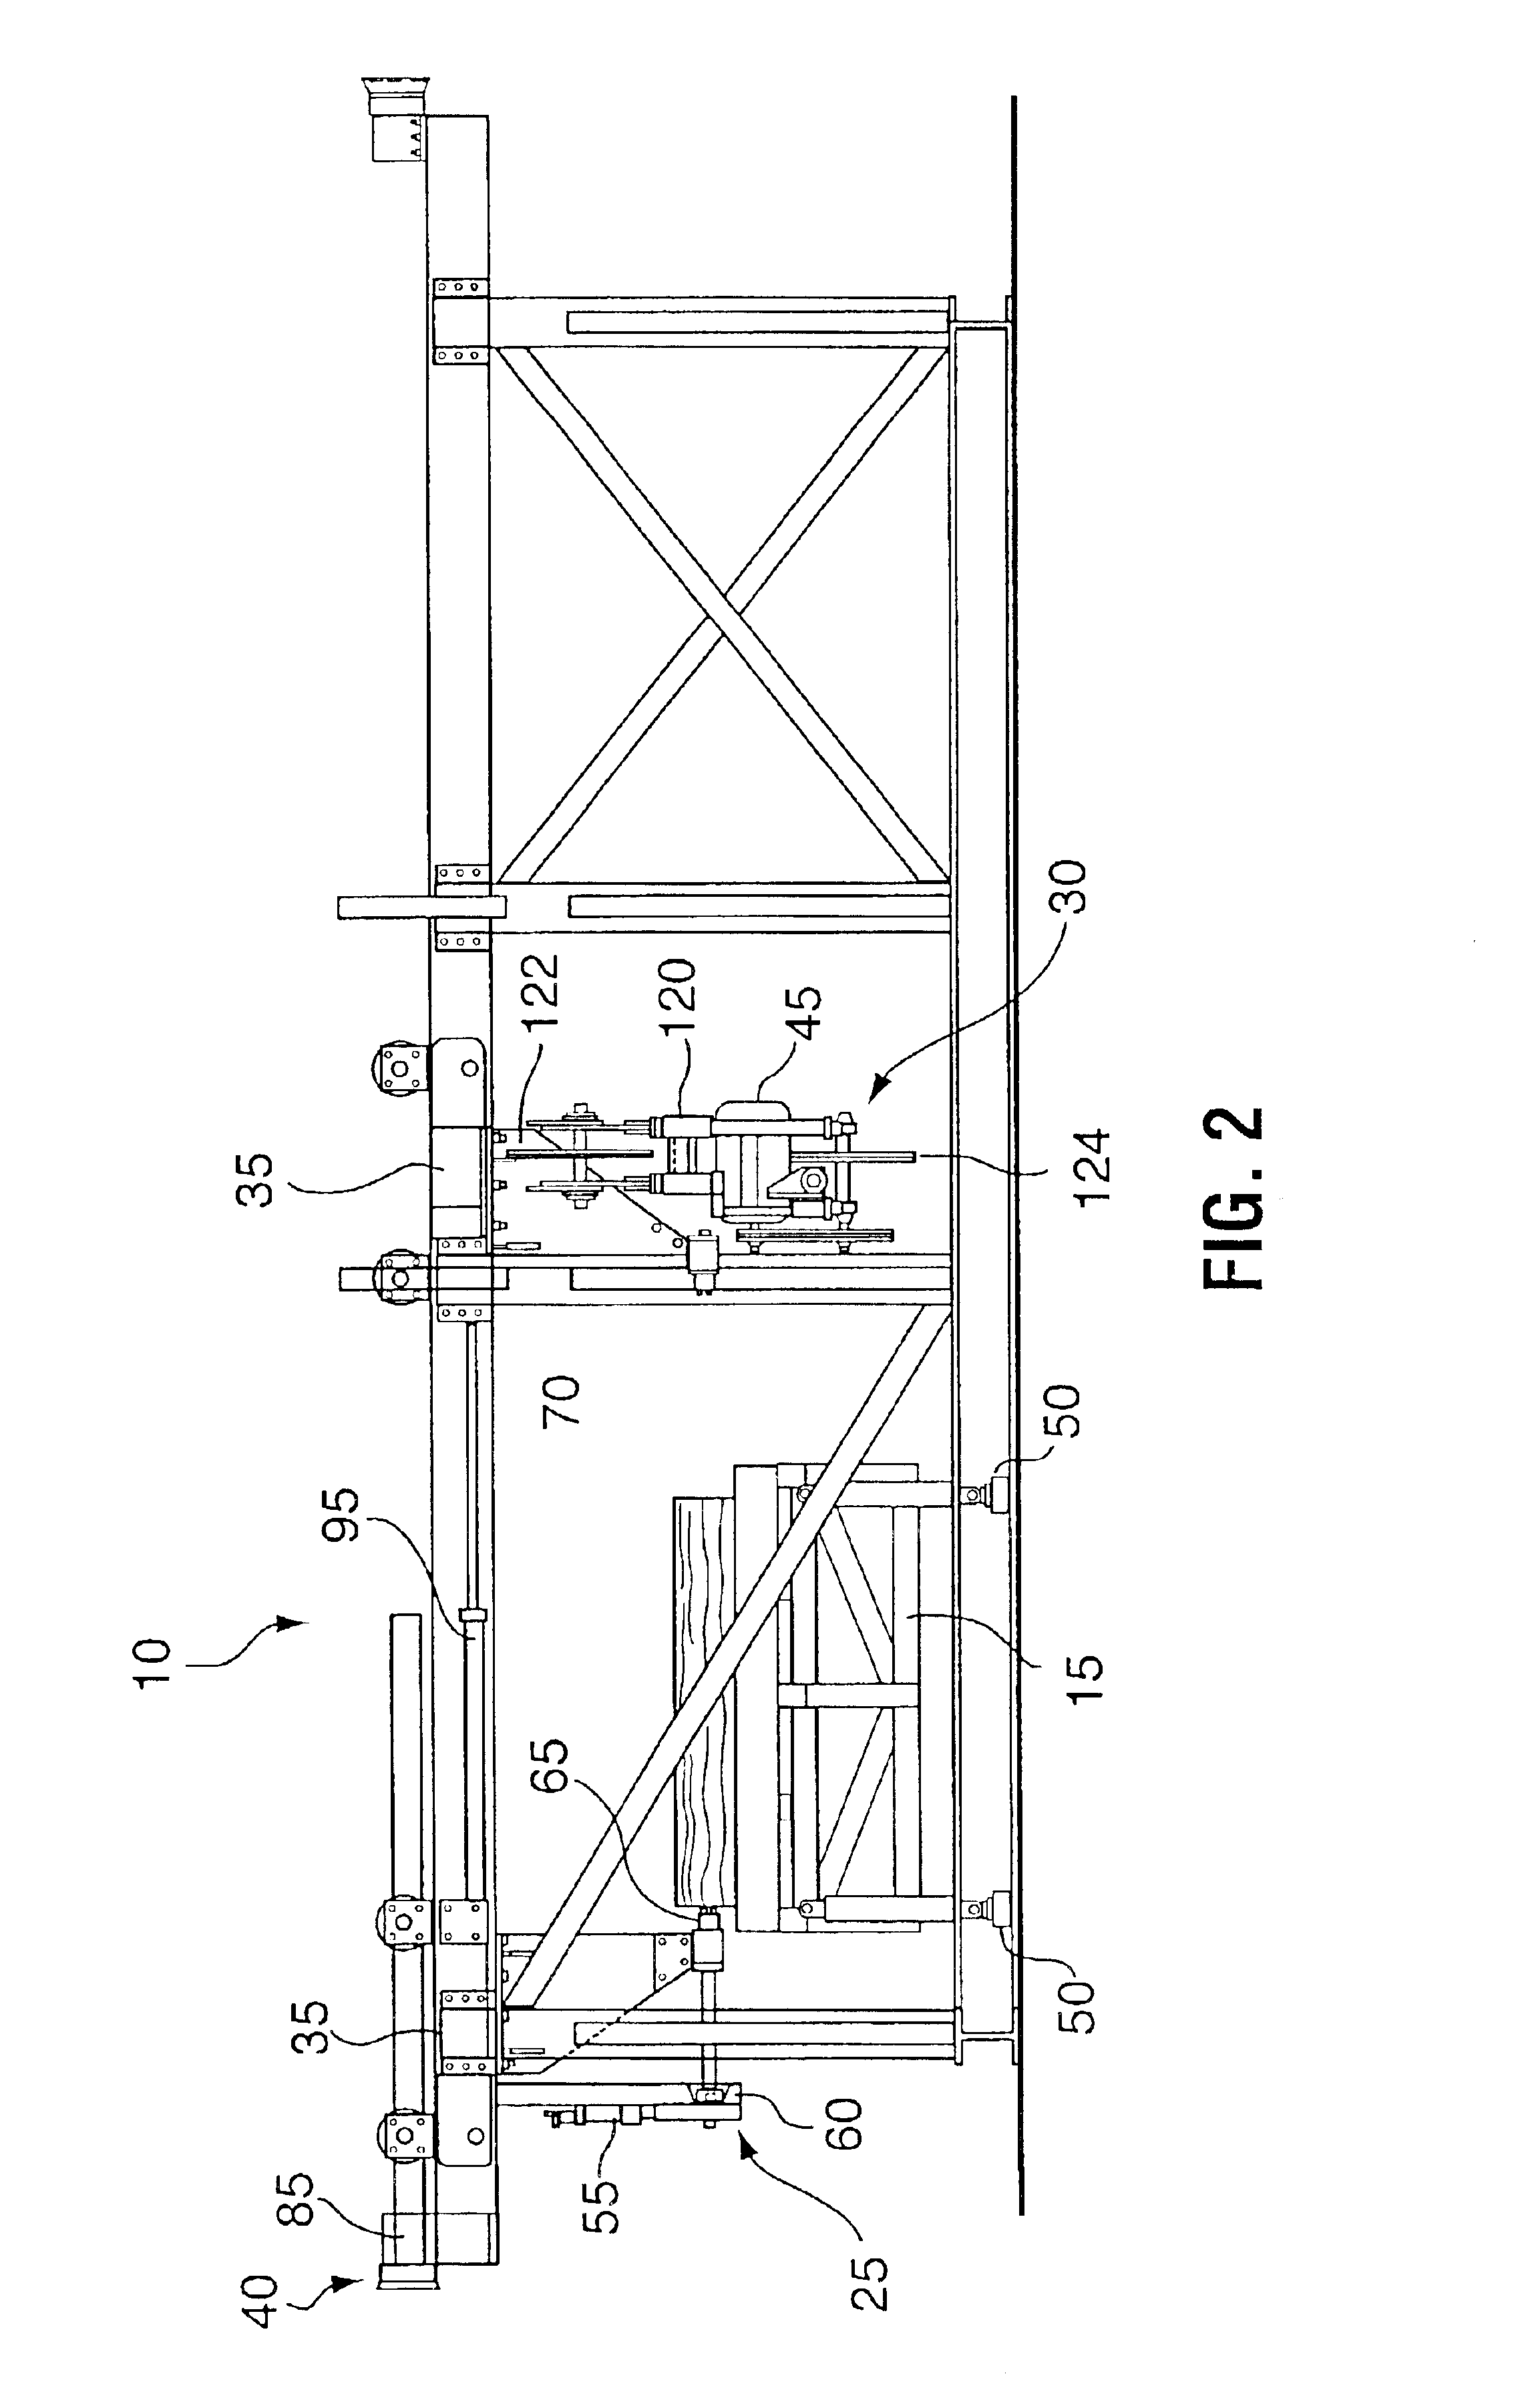 End-dogging head saw and method